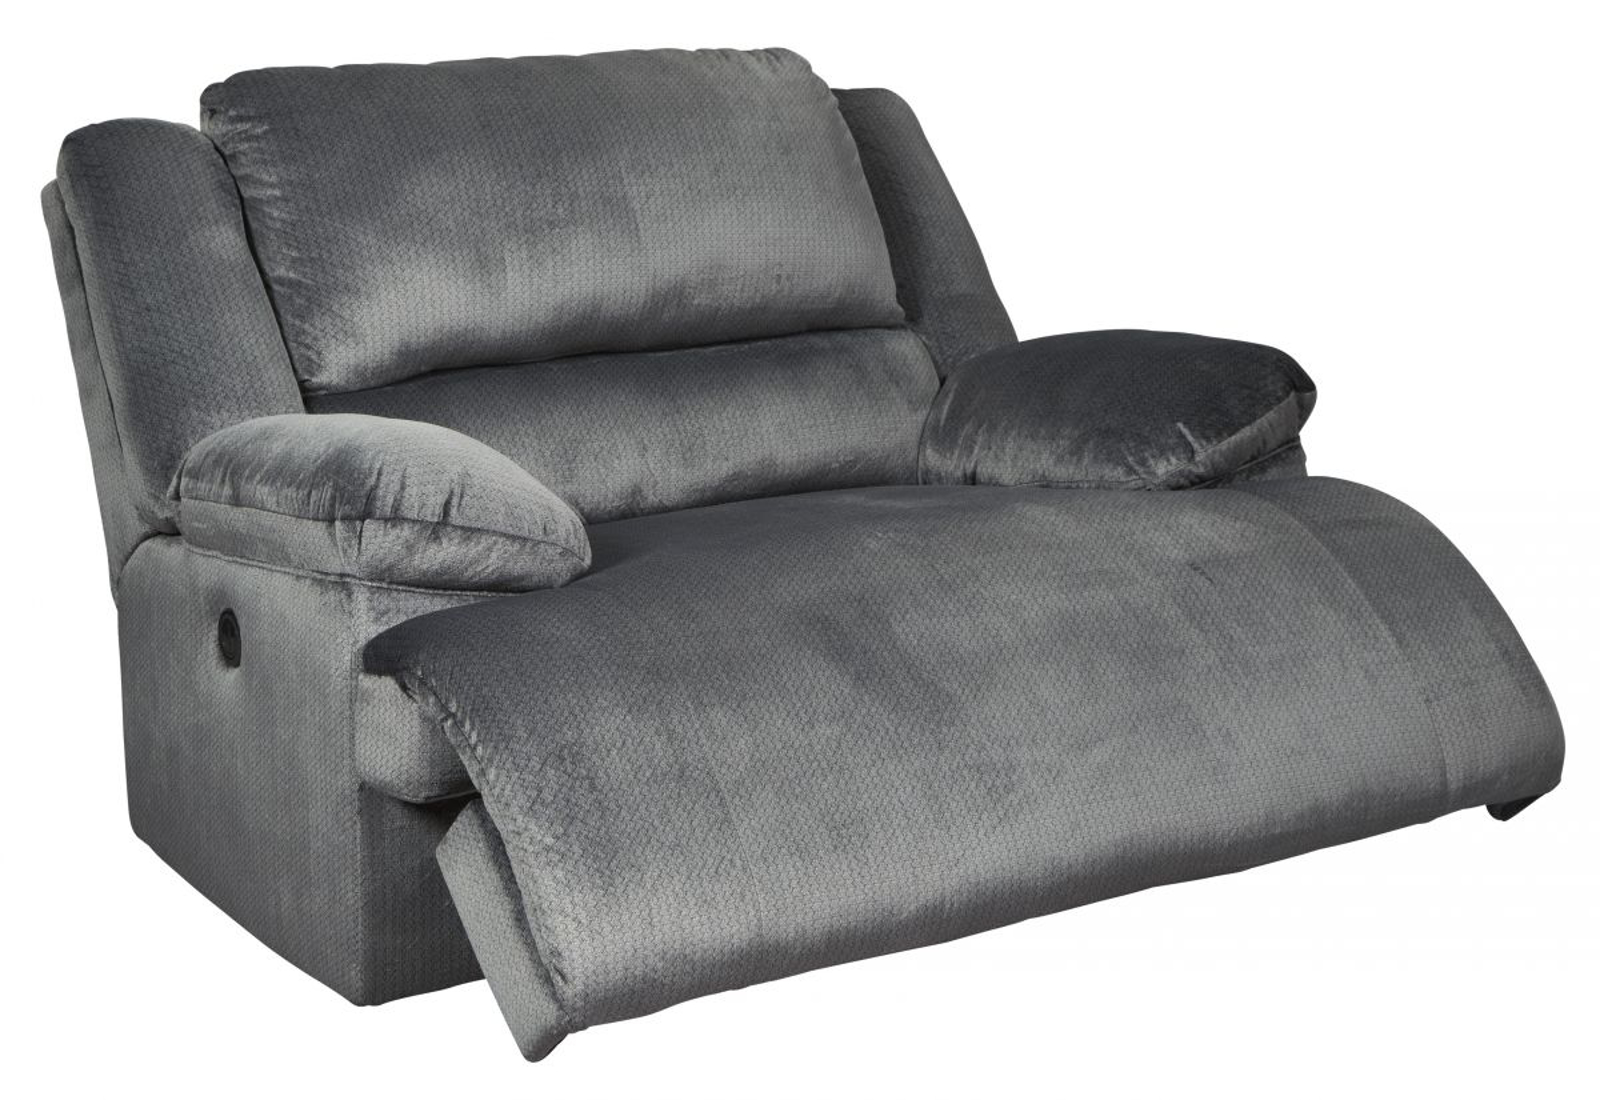 Picture of Clonmel Recliner